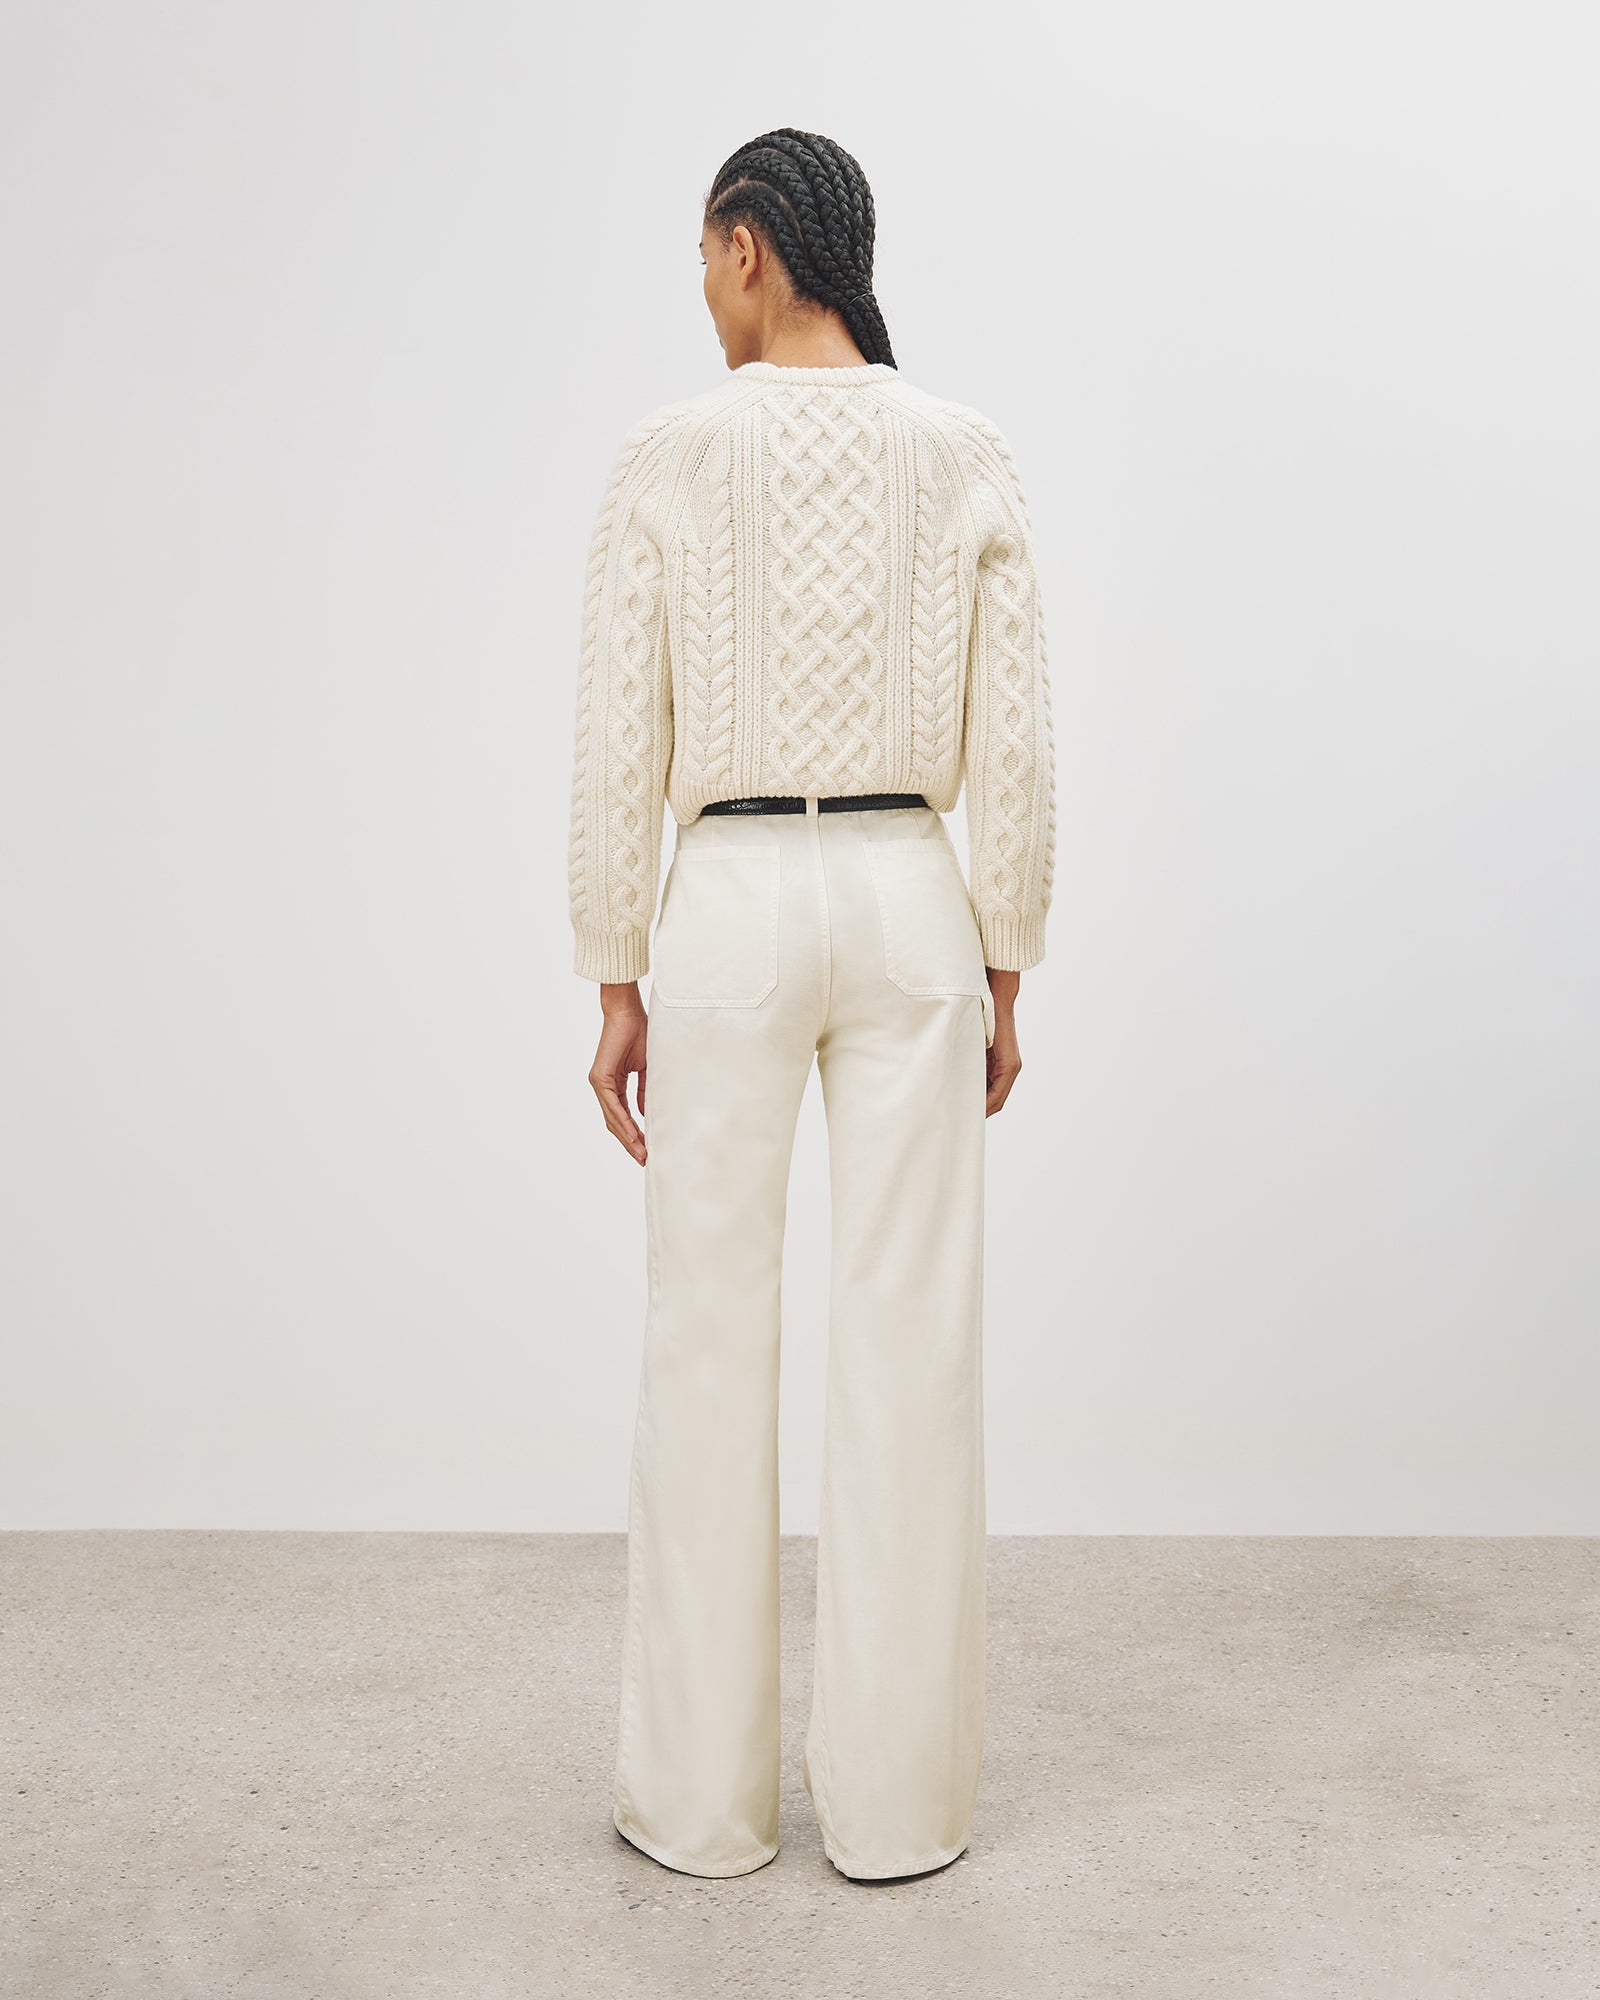 The Nili Lotan Quentin Pant in Stone available at The New Trend Australia